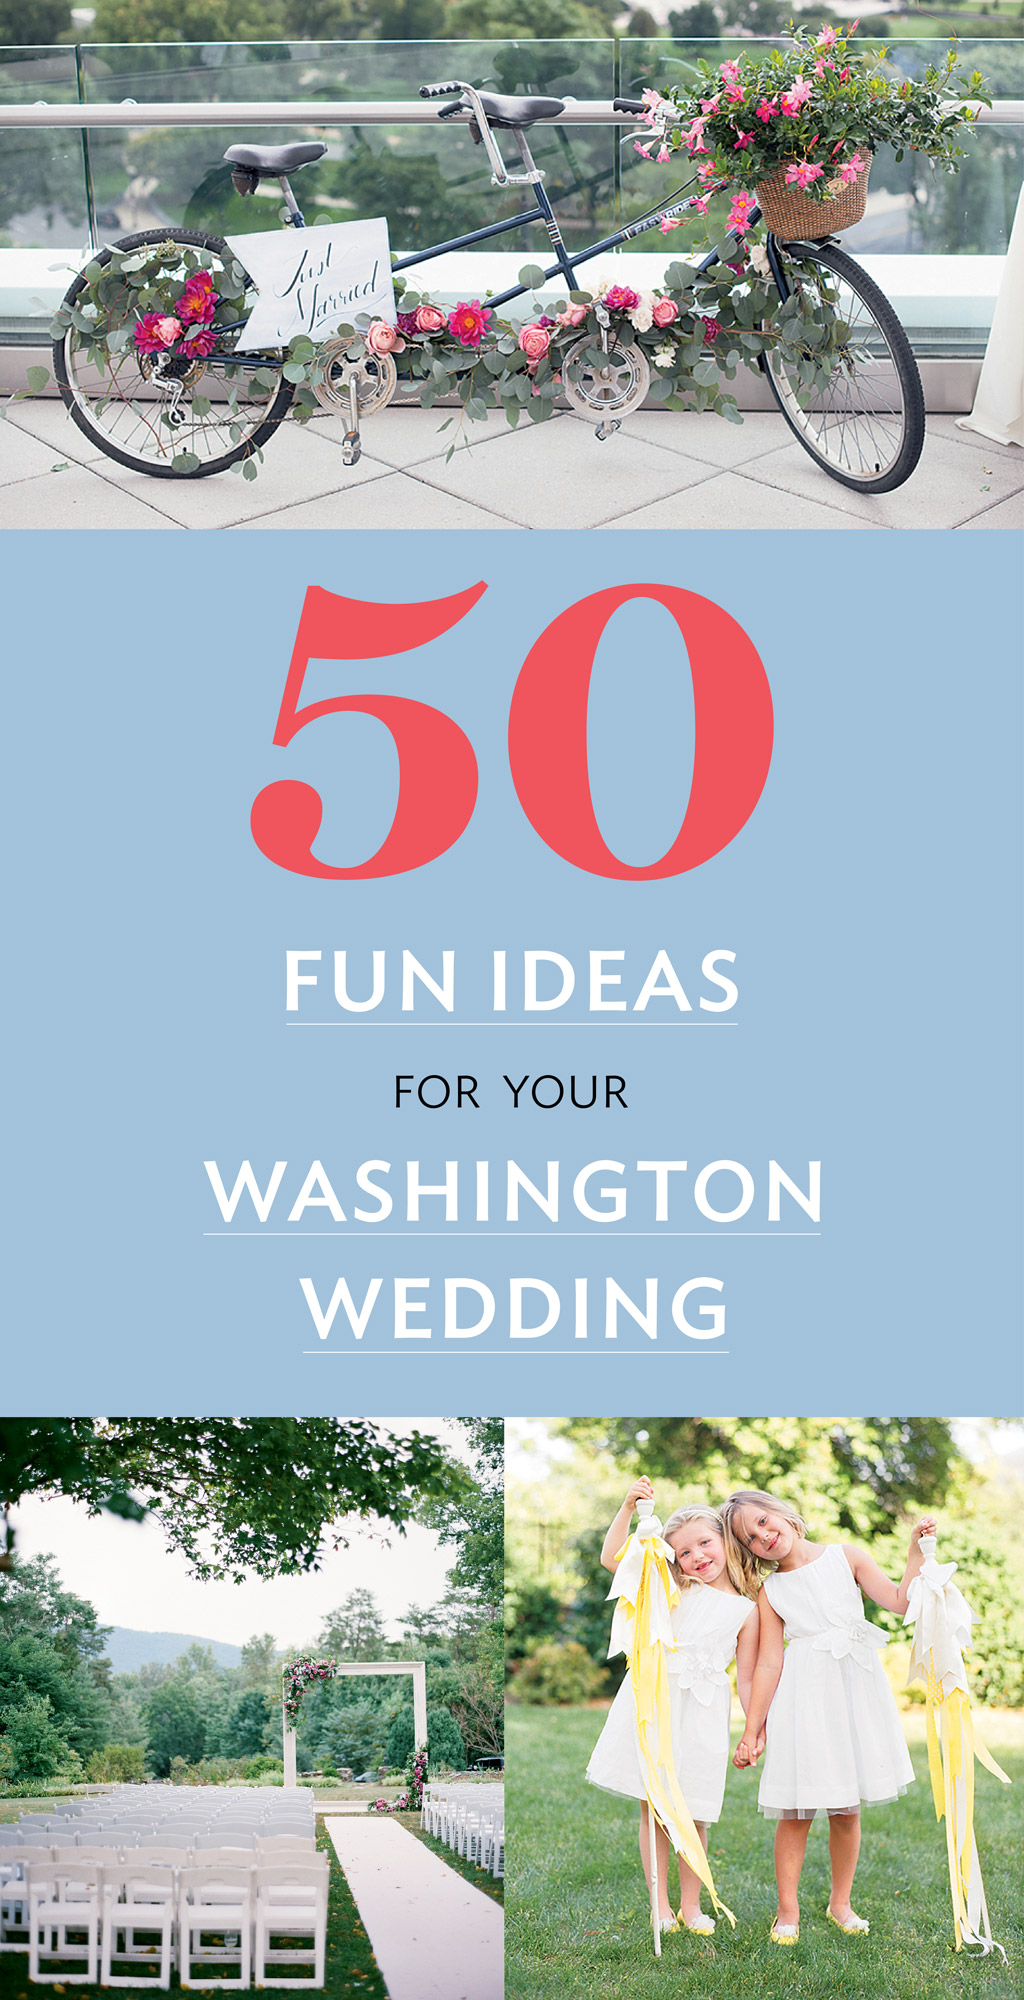 50 Clever Wedding Ideas to Make Your Big Day Stand Out